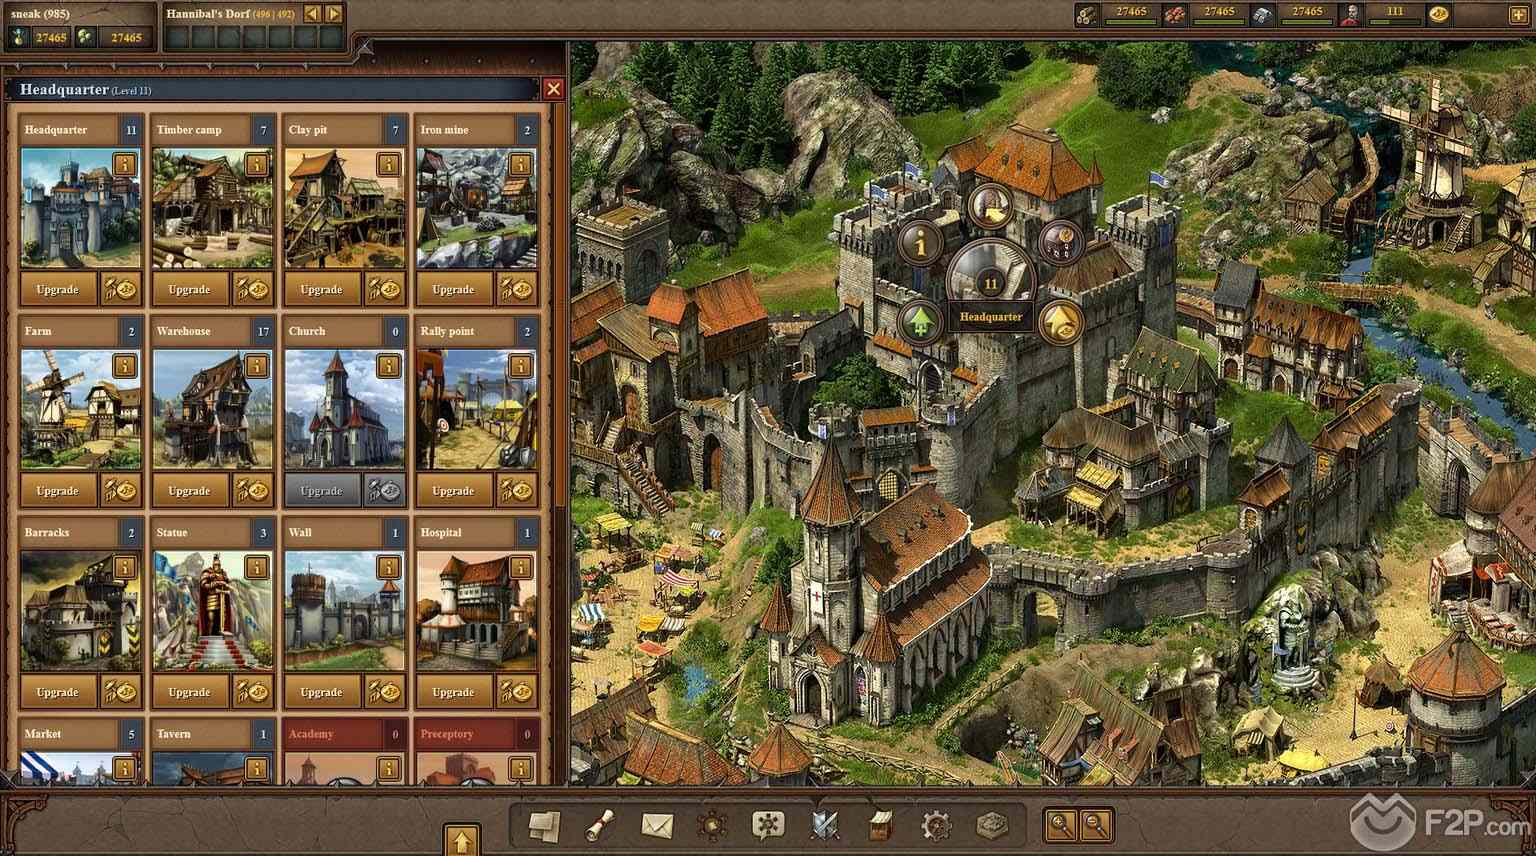 Tribal Wars 2 Review, Medieval Browswer MMORTS Game